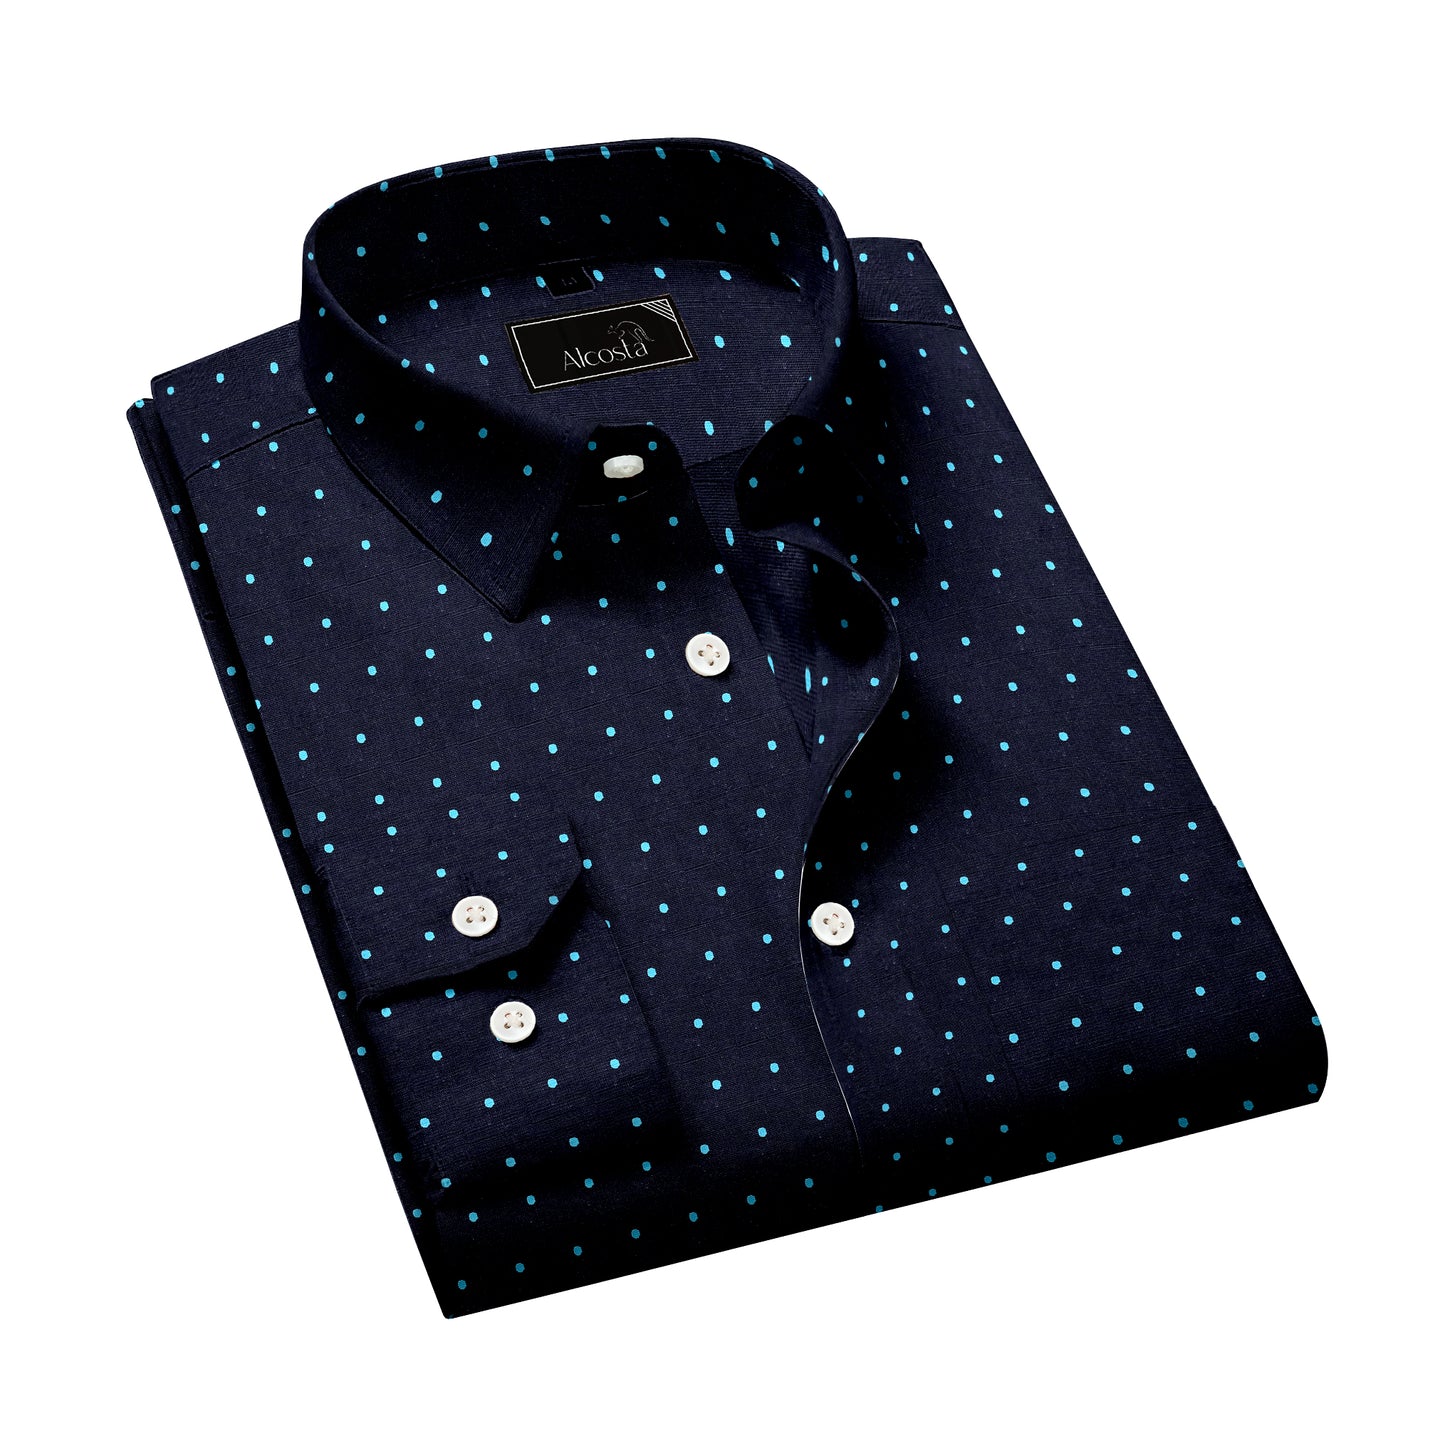 MIDNIGHT BLUE WITH POLKA DOTTED COTTON SHIRT.